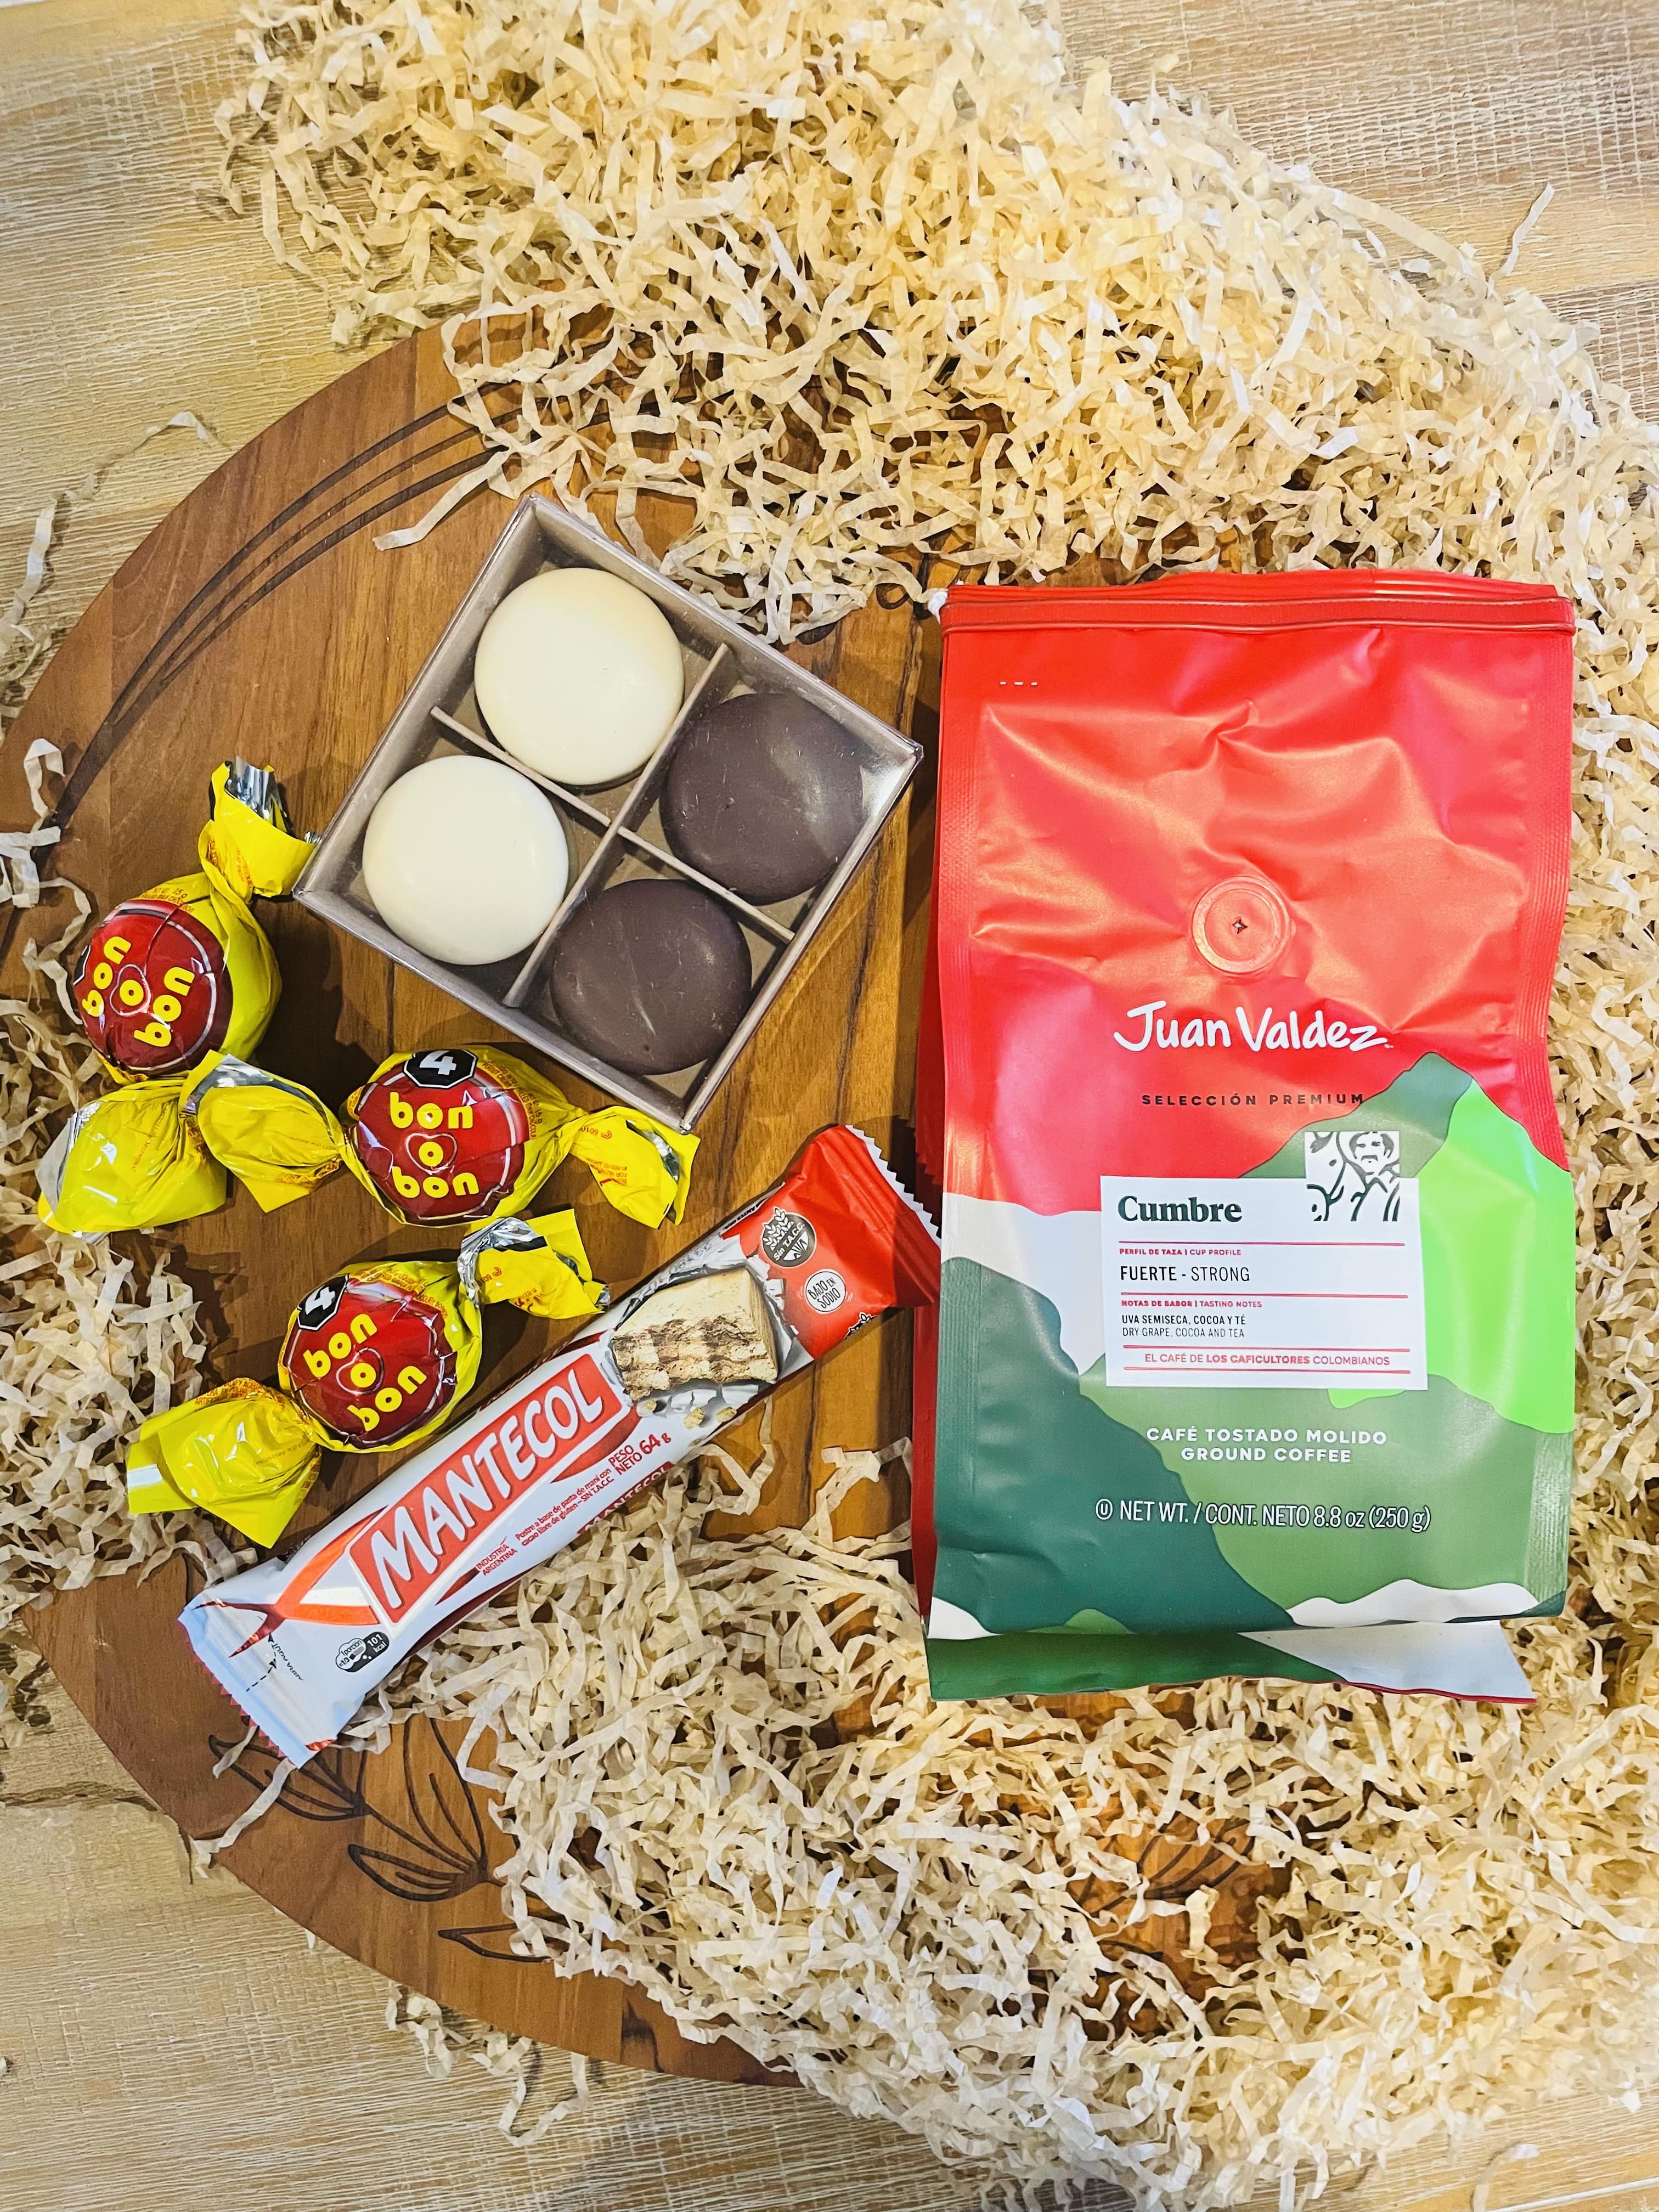 Juan Valdez Colombian Coffee and Sweets Hamper - Cumbre Premium Ground - Christmas Edition